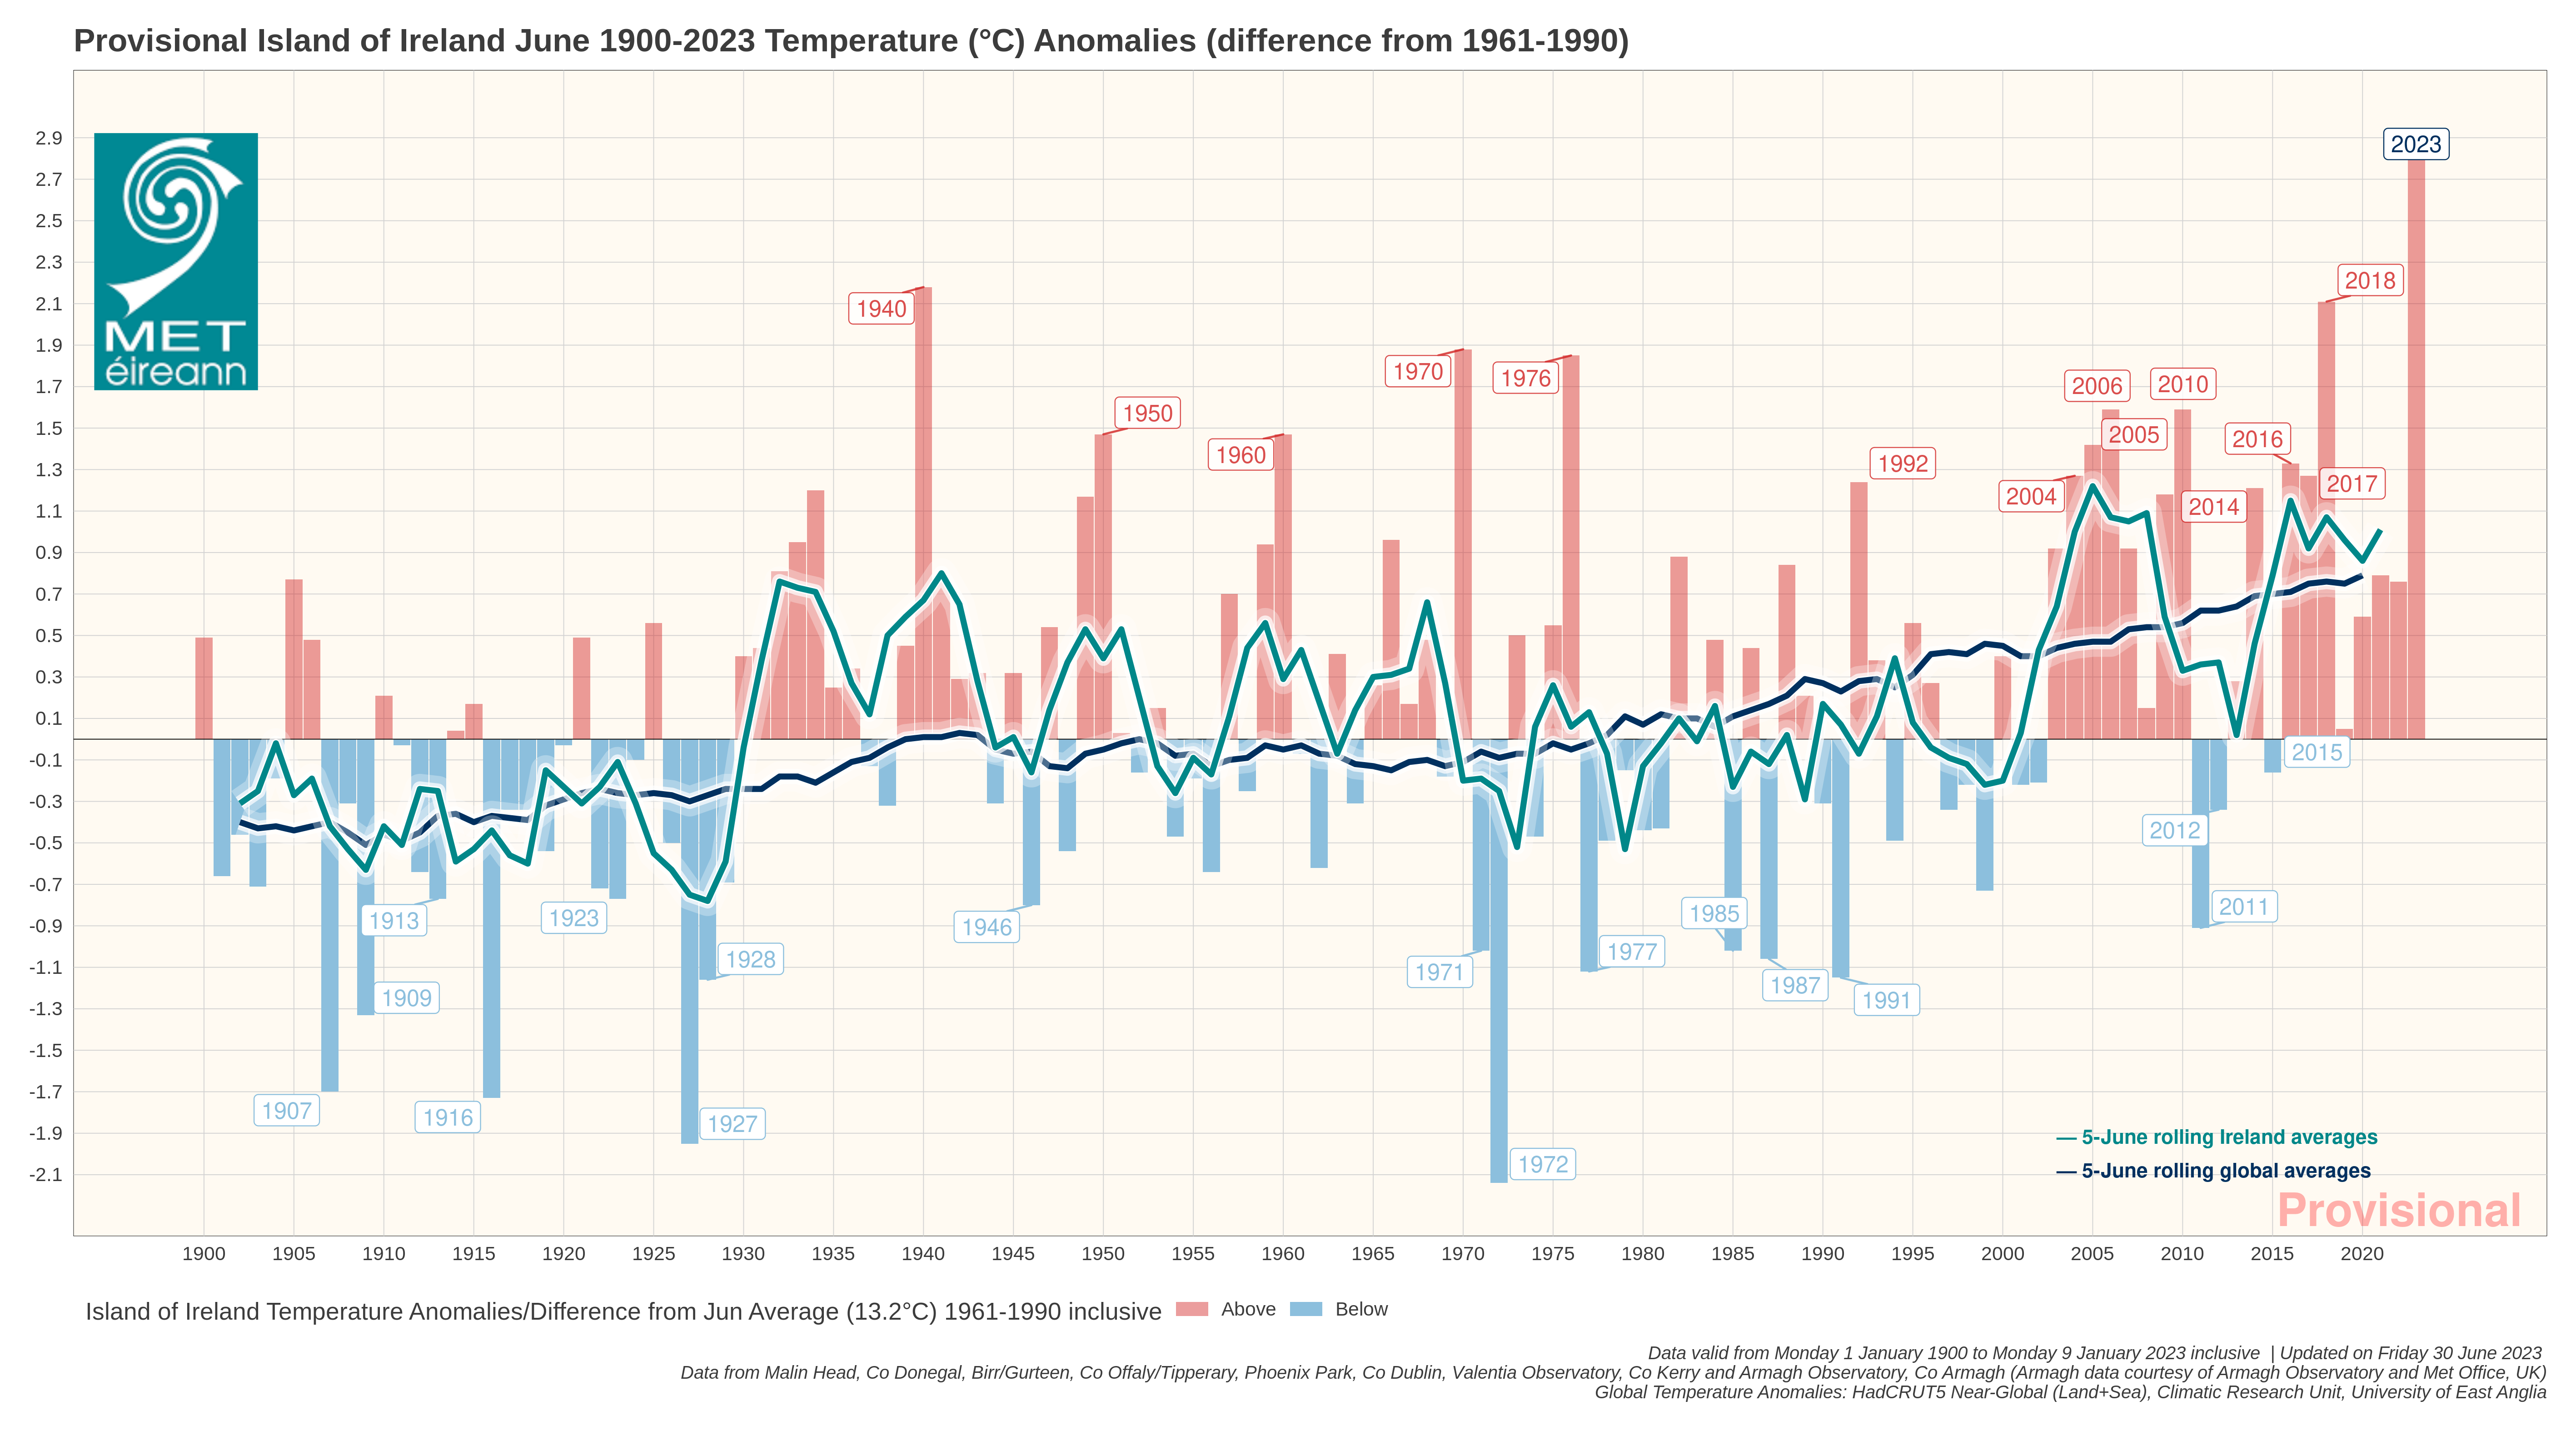 Image of provisional island of ireland June 1900 - 2023 temperature anomolies - difference from 1961-1990